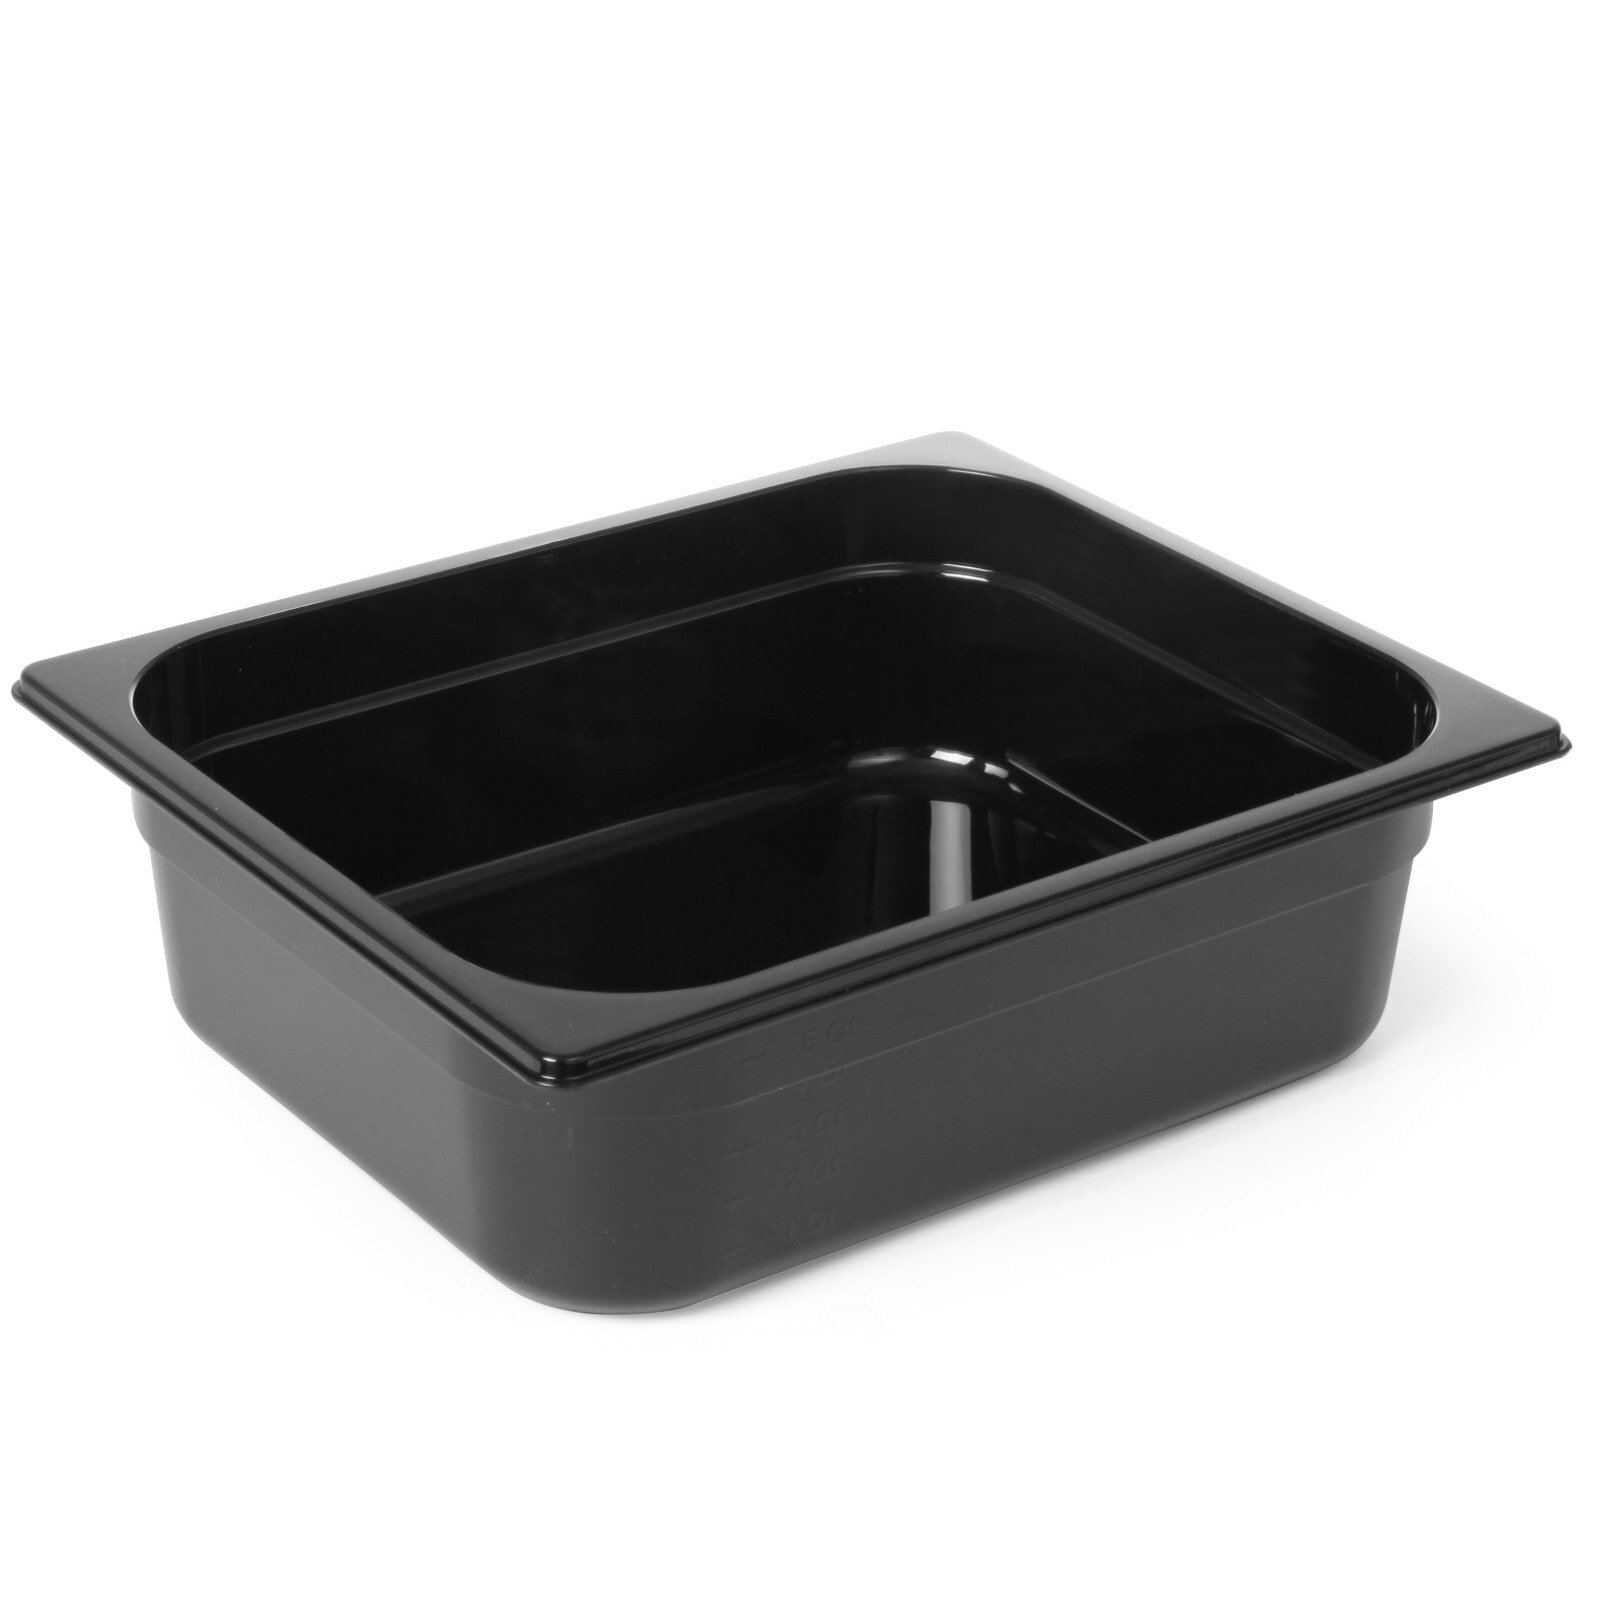 Black polycarbonate container GN 1/2, height 100 mm - Hendi 862421